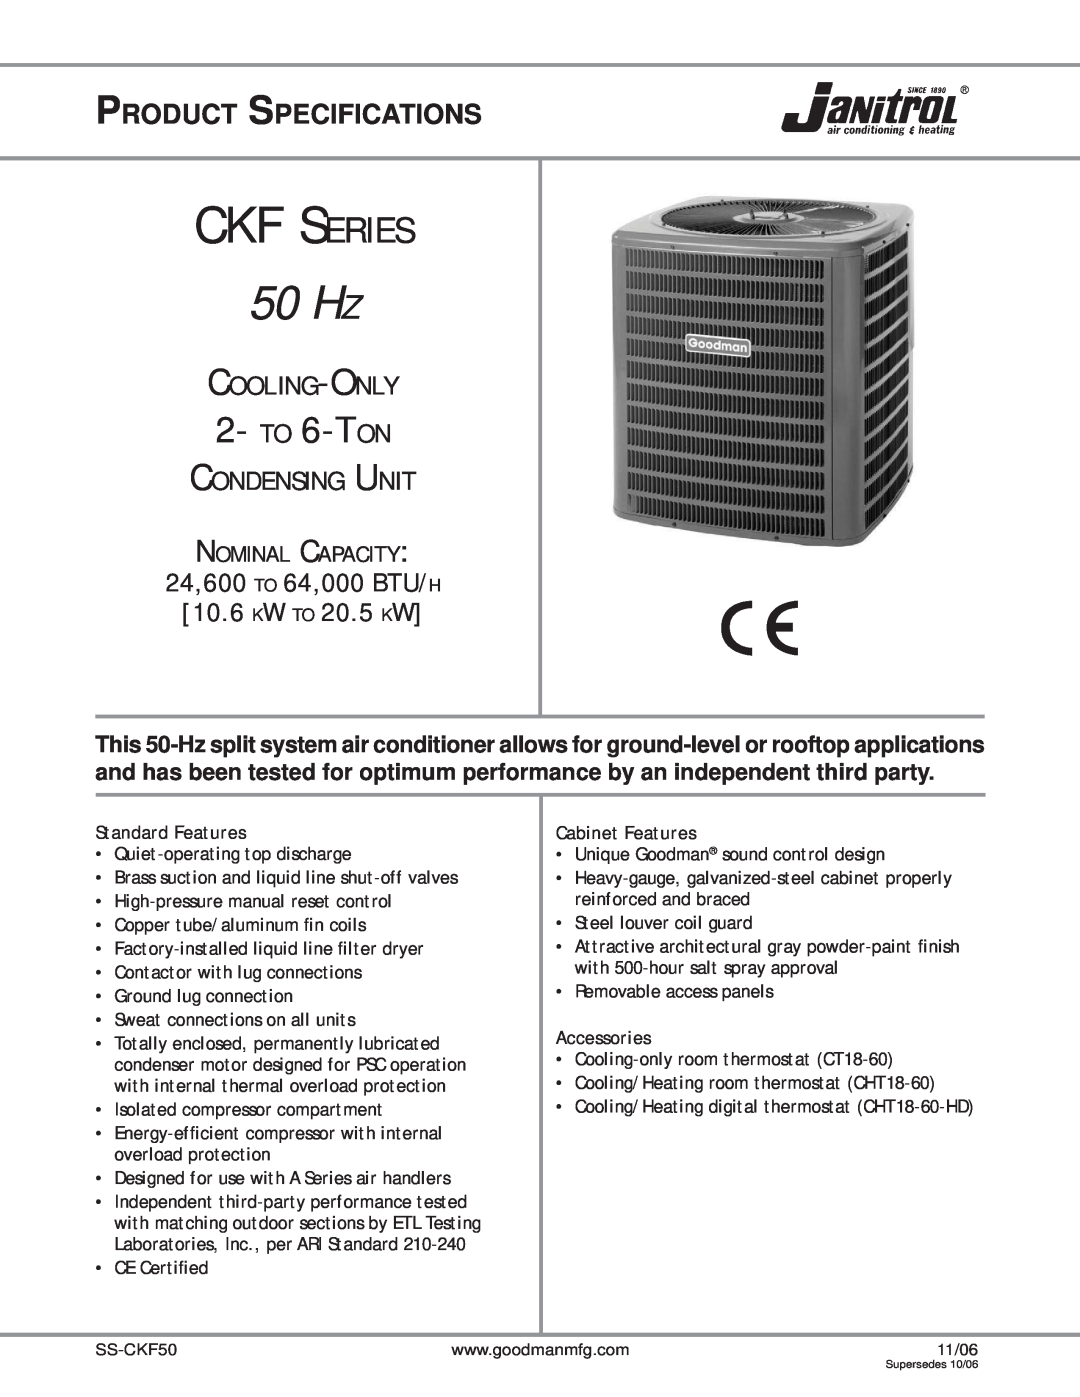 Goodman Mfg SS-CKF50 specifications Cooling-Only, Condensing Unit, 24,600 TO 64,000 BTU/H 10.6 KW TO 20.5 KW, Accessories 